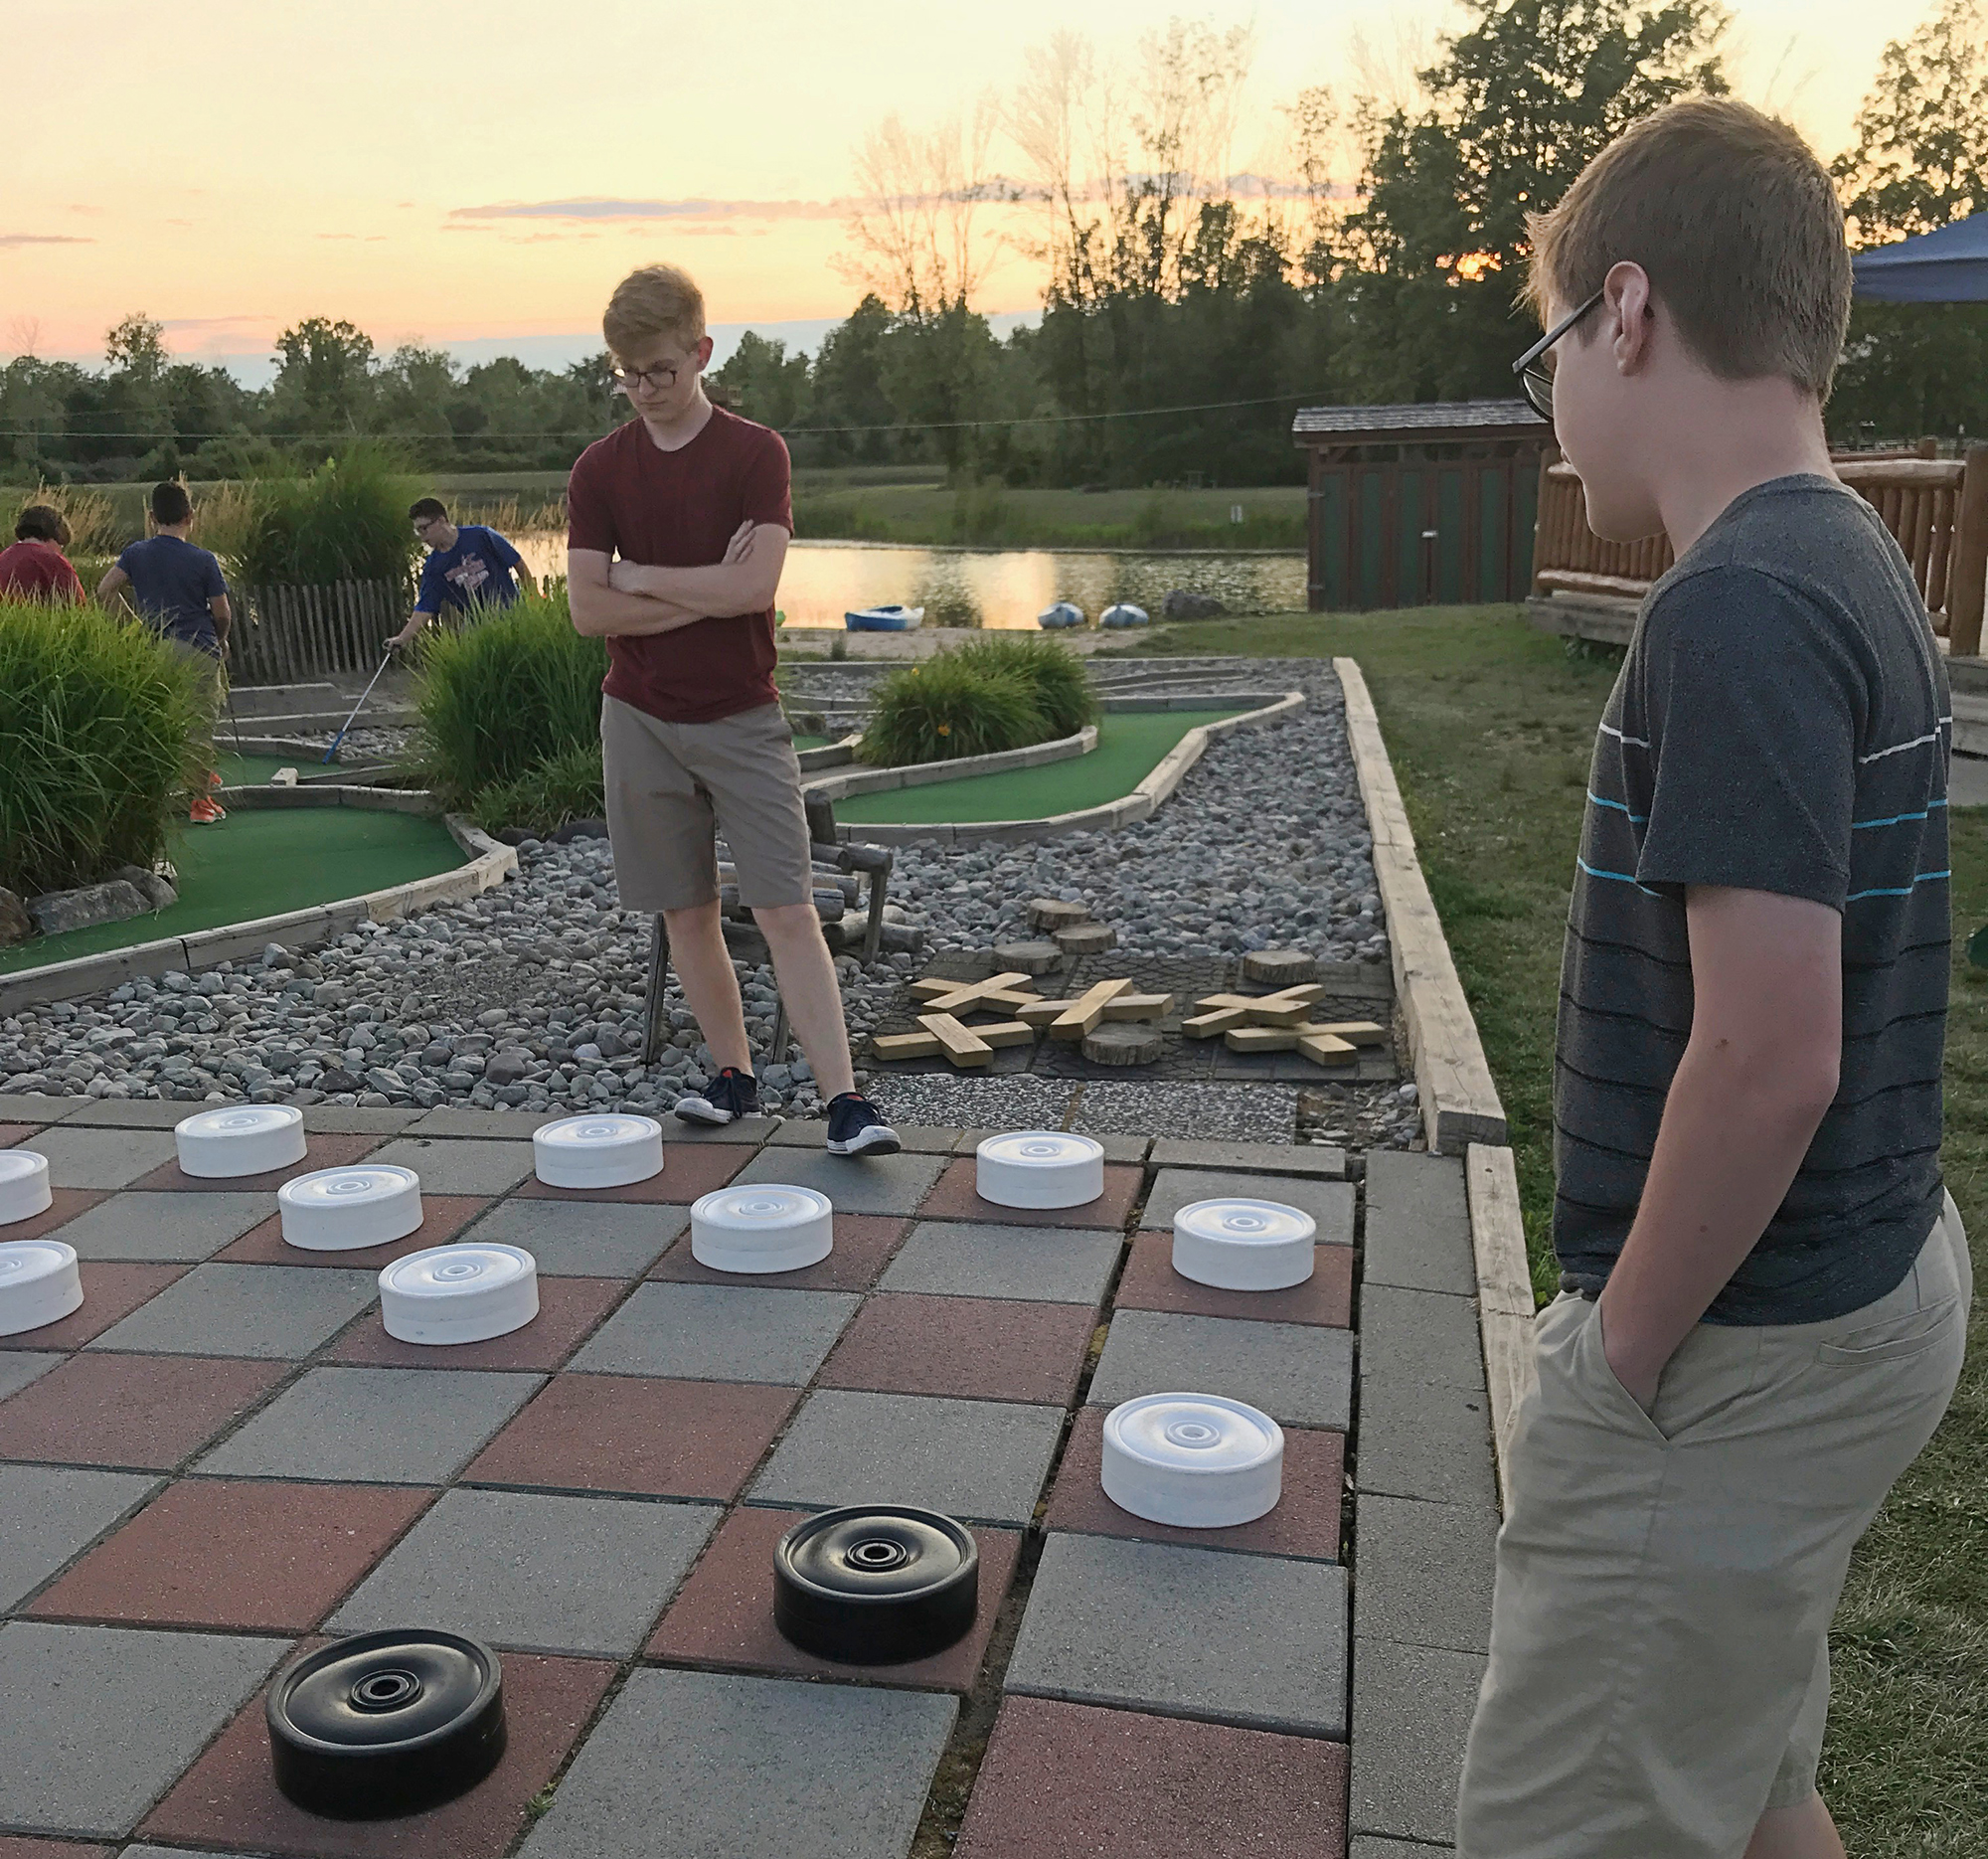 Two boys playing a large game of checkers.